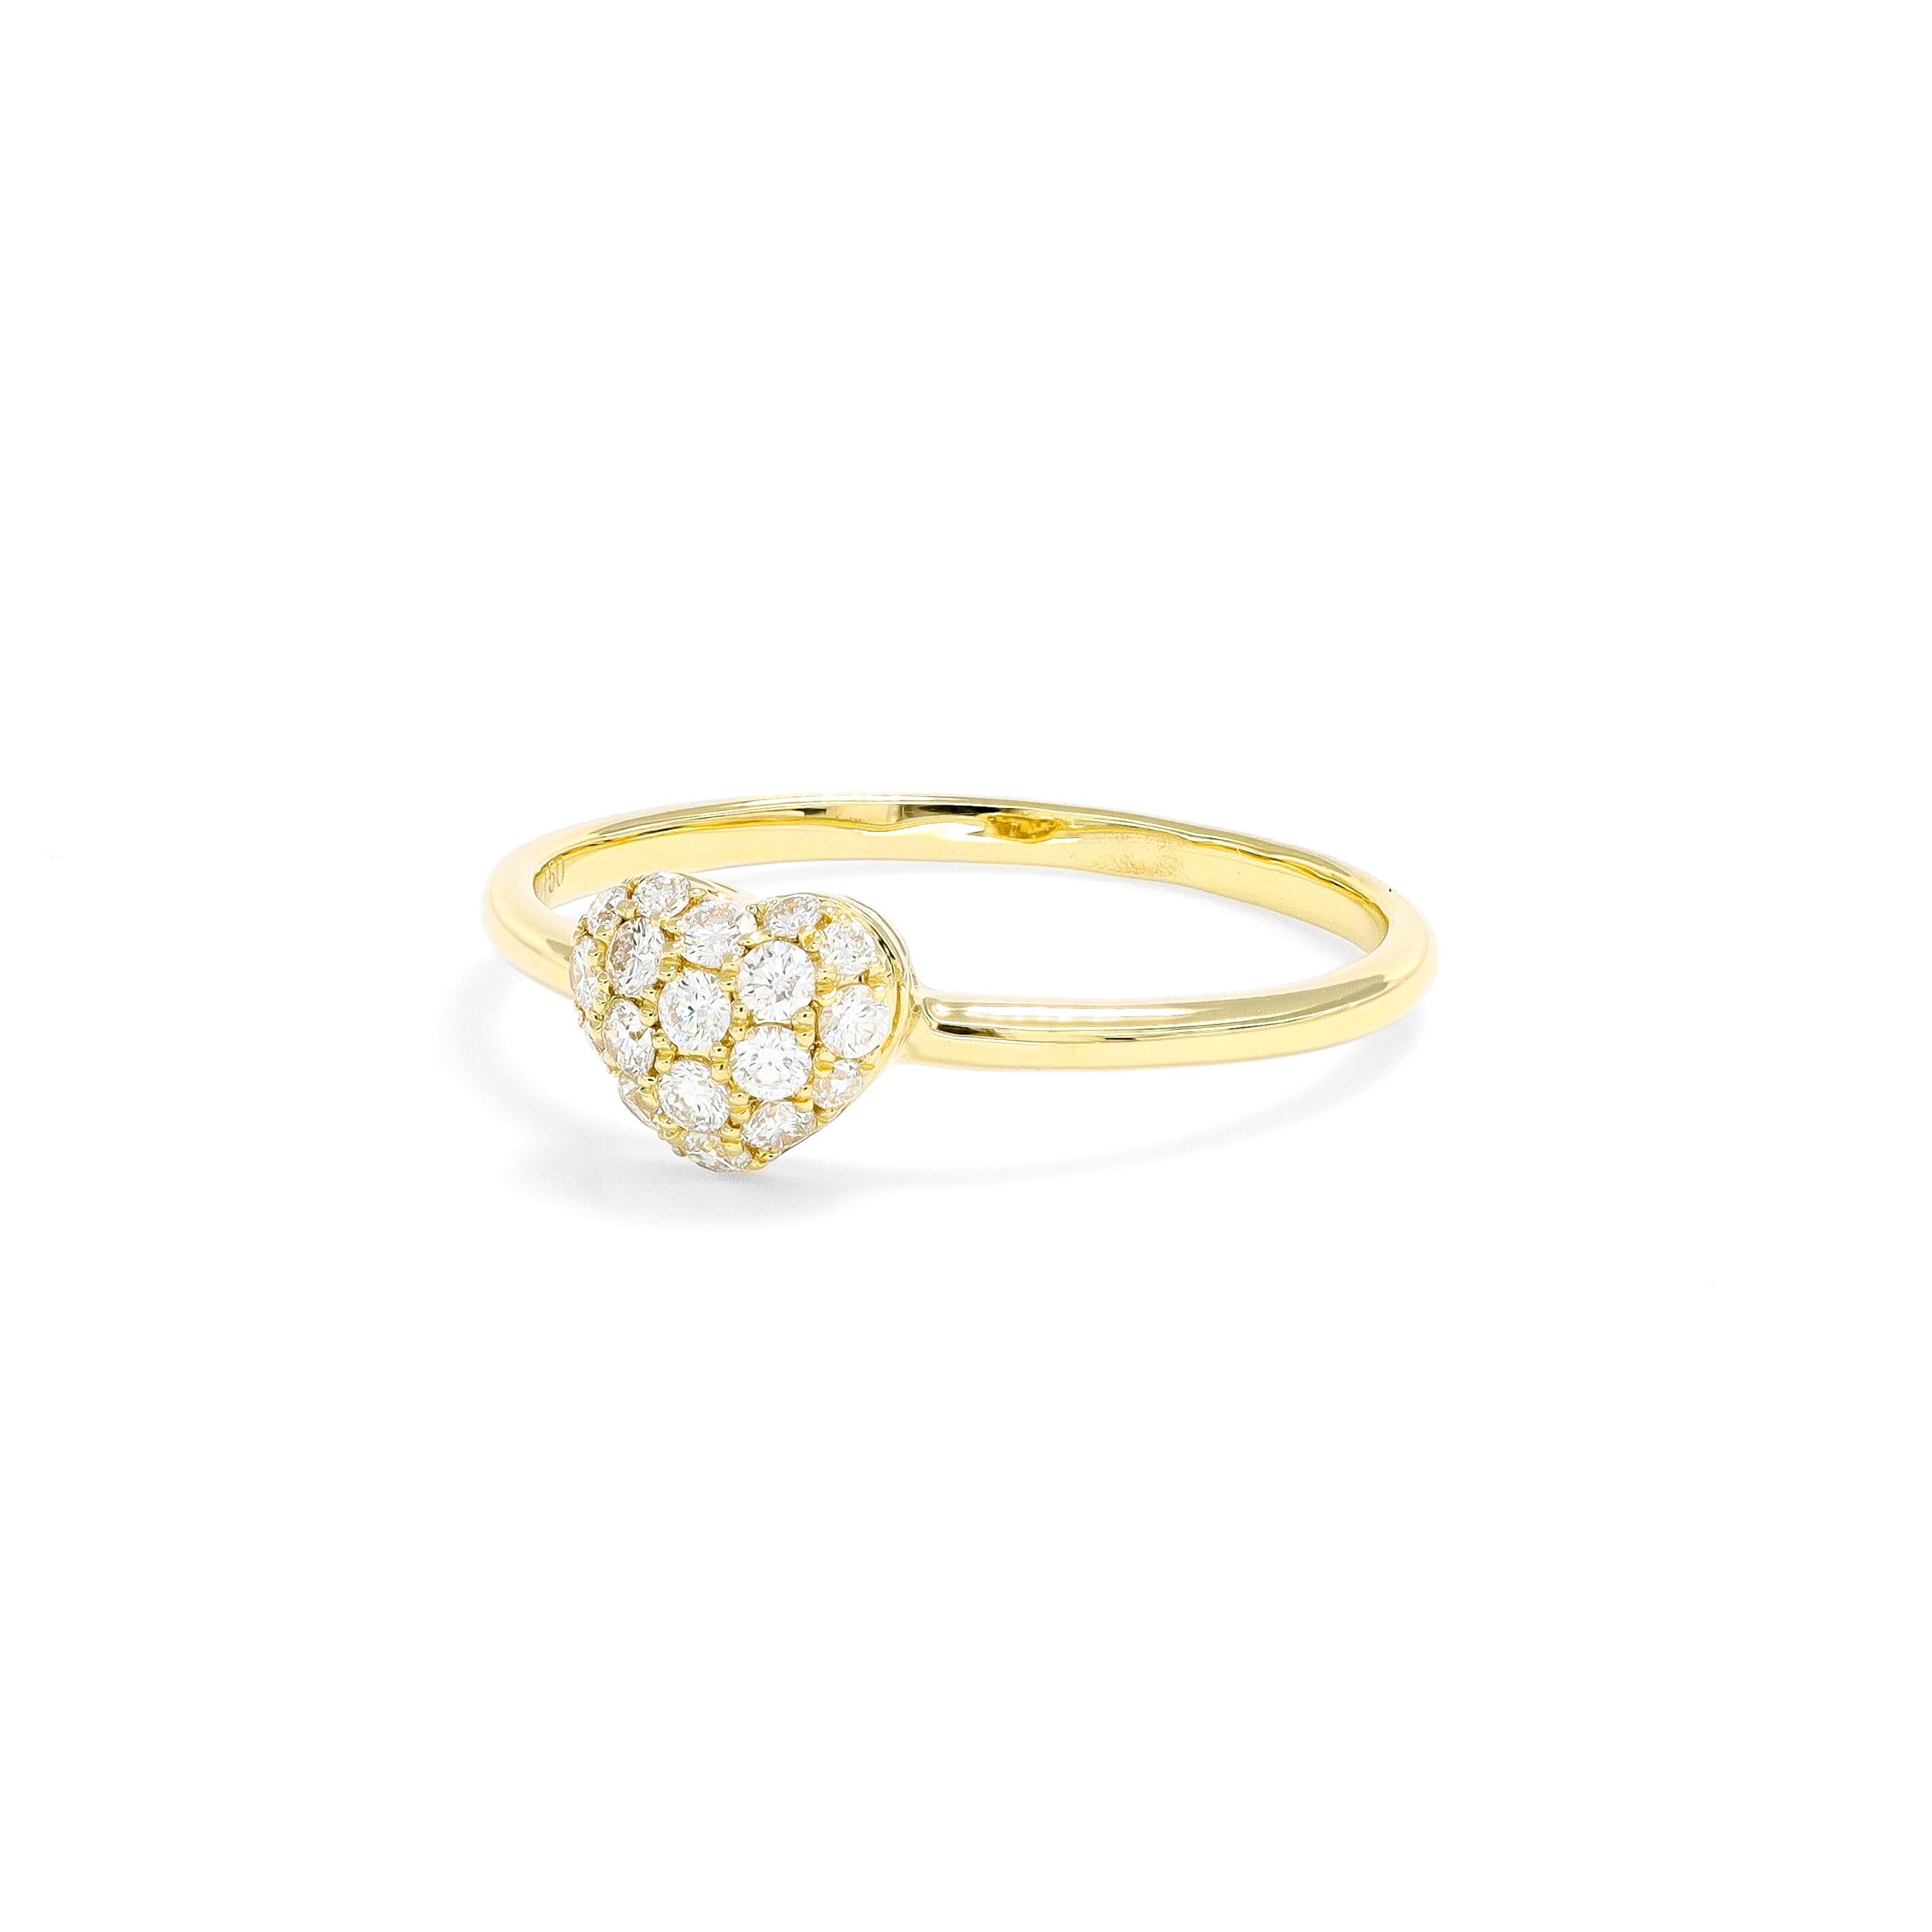 We are delighted to introduce our heart-shaped diamond ring—a symbol of love, commitment, and cherished promises. Crafted in radiant 18 KT Yellow Gold and adorned with 0.26 carats of sparkling diamonds, this ring embodies the essence of simplicity